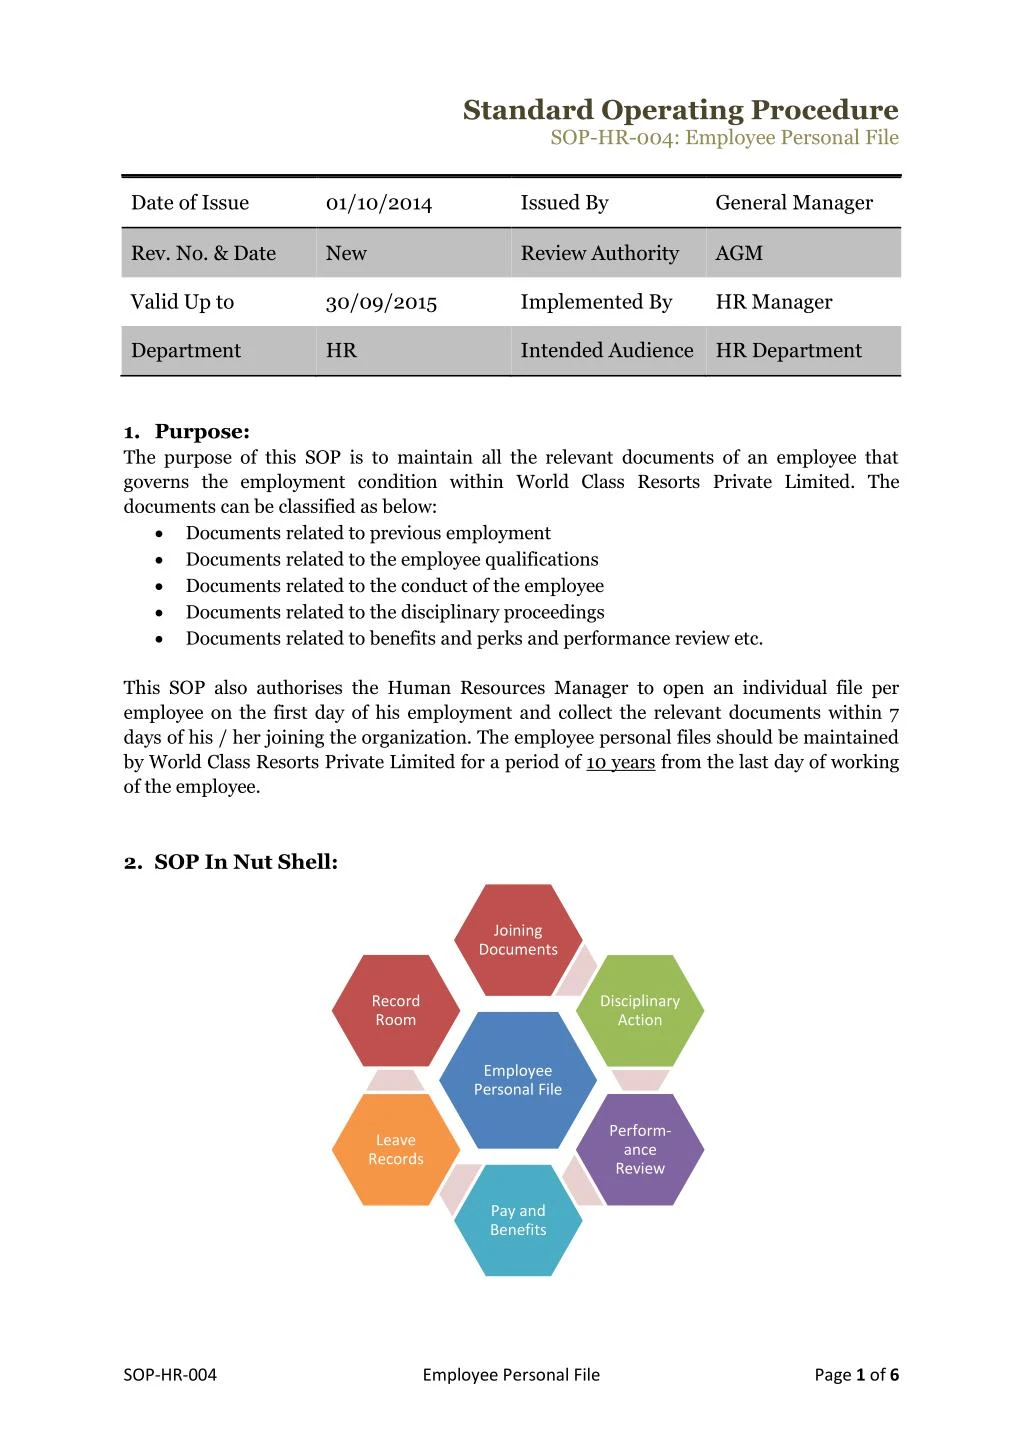 Standard Operating Procedures Template Free from image4.slideserve.com